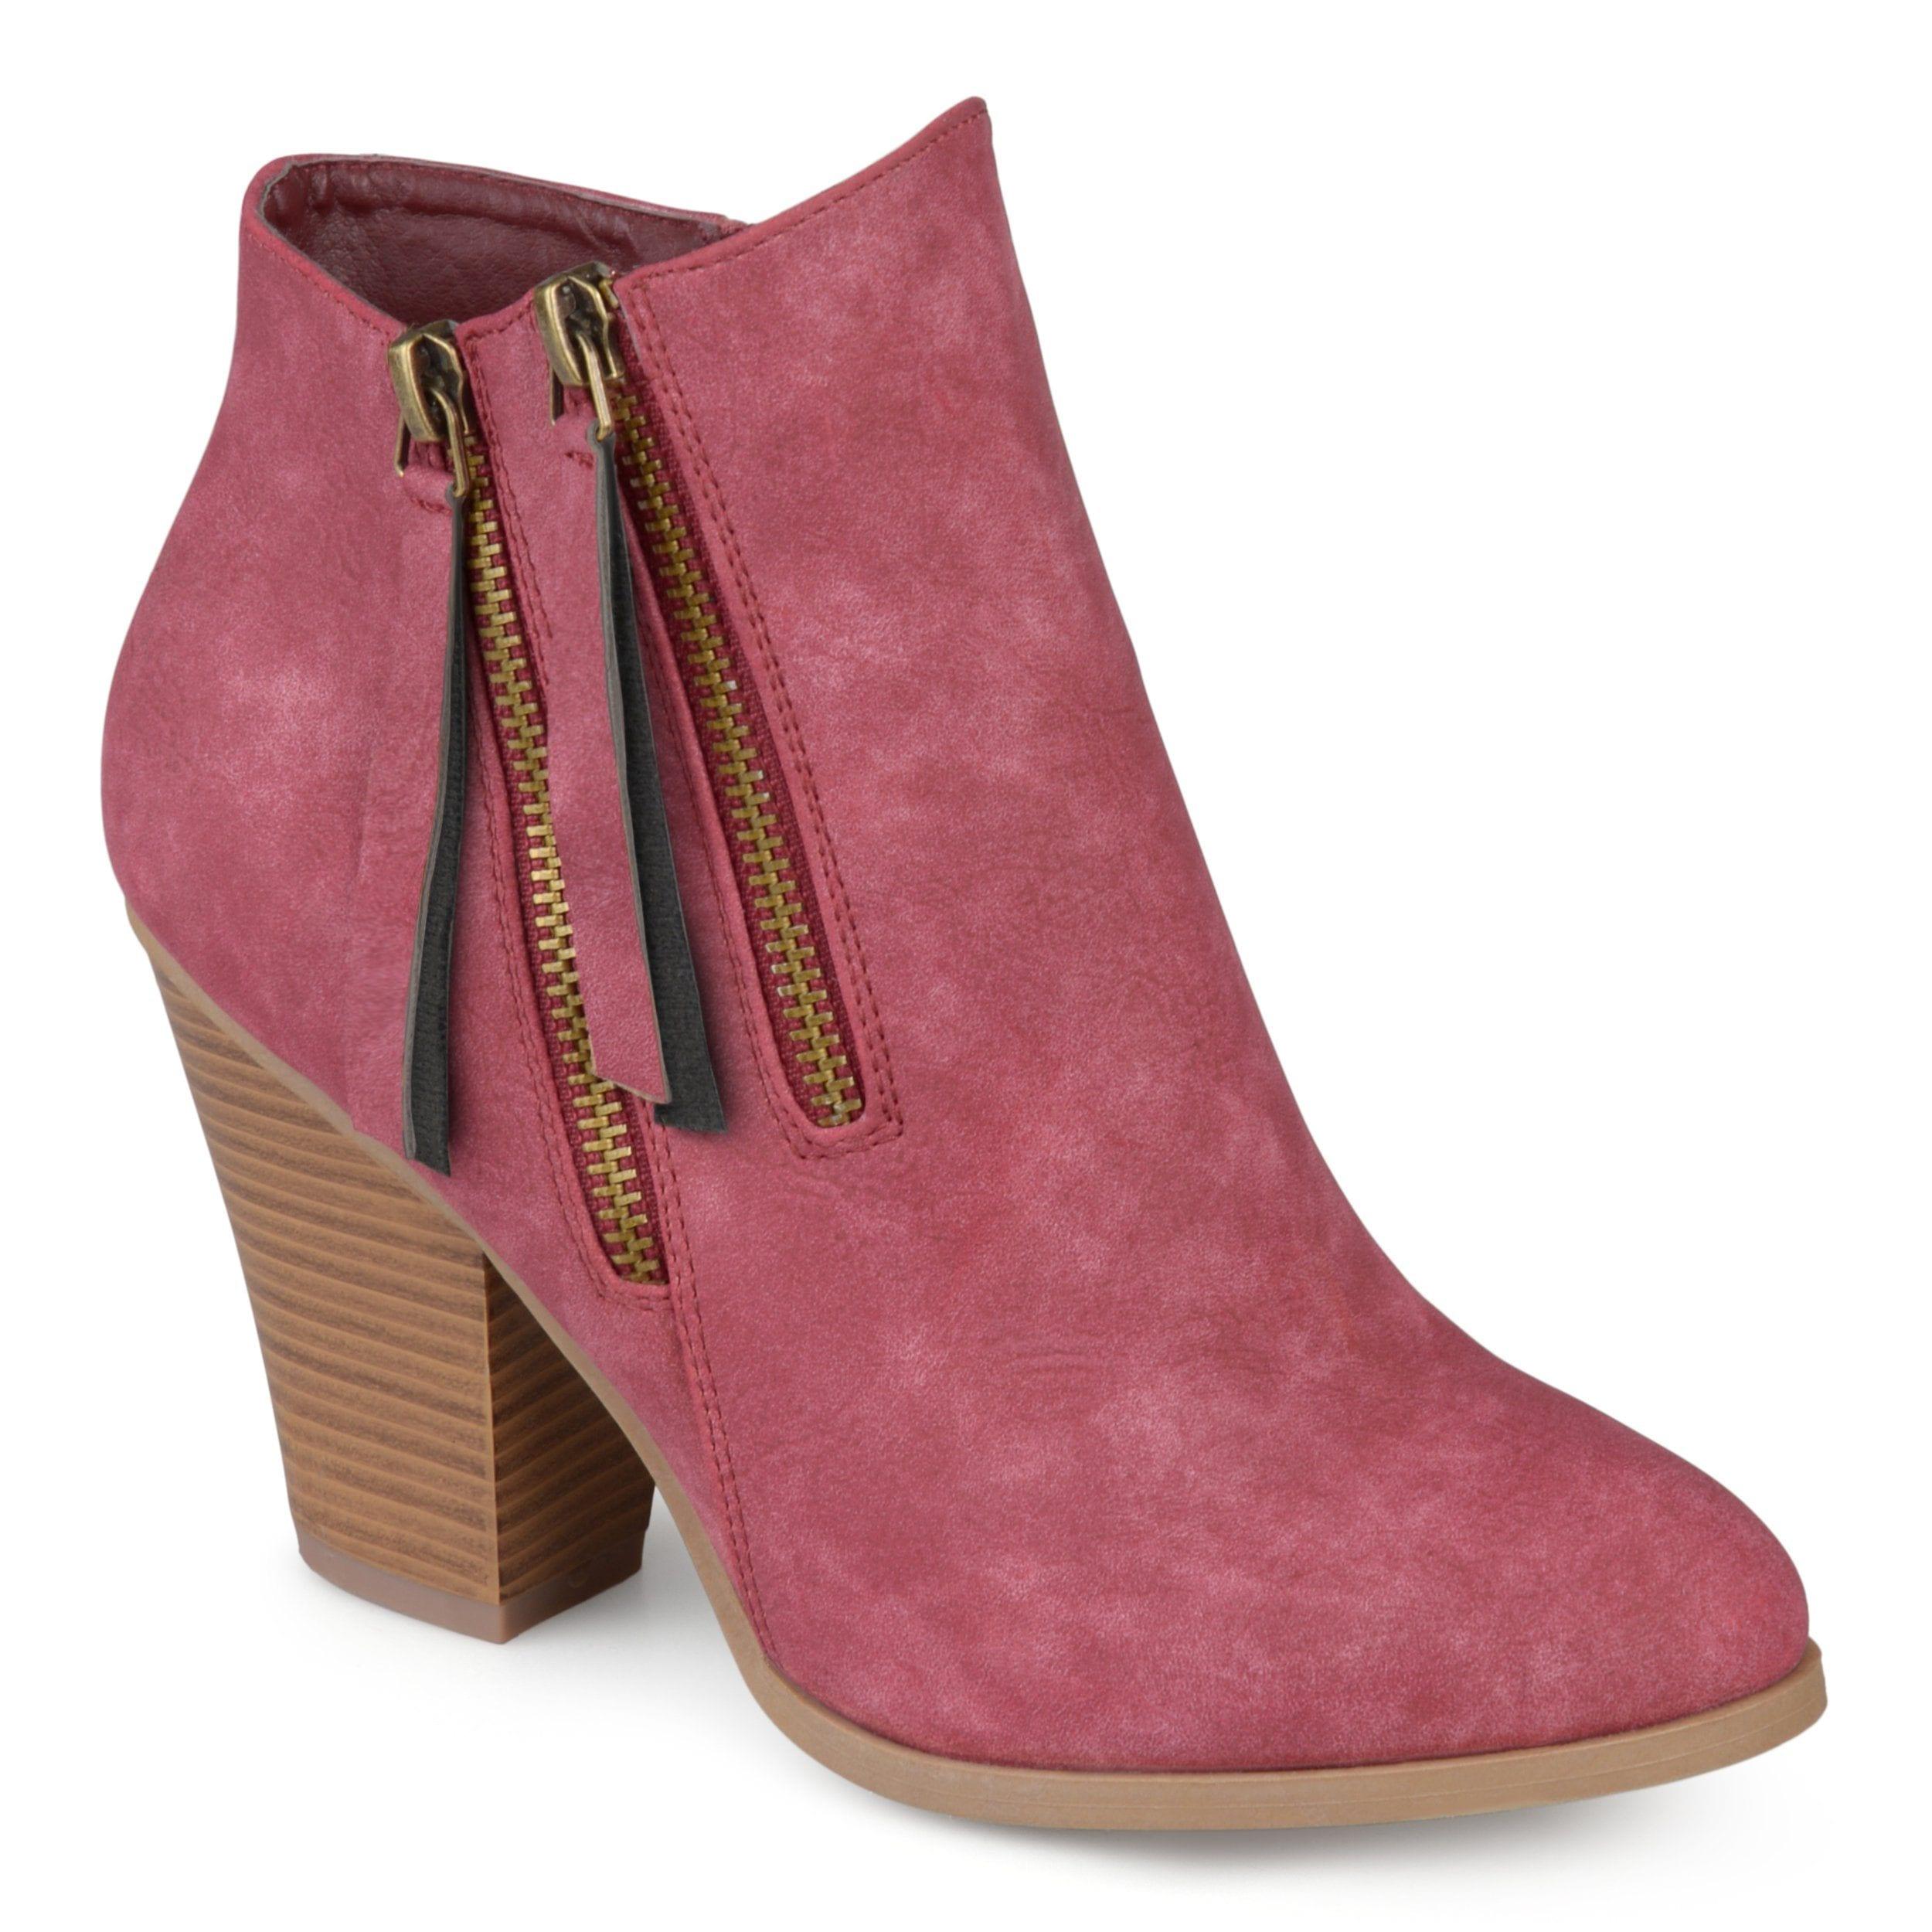 Pretty in Pink J. Crew Lookbook - Red Soles and Red Wine